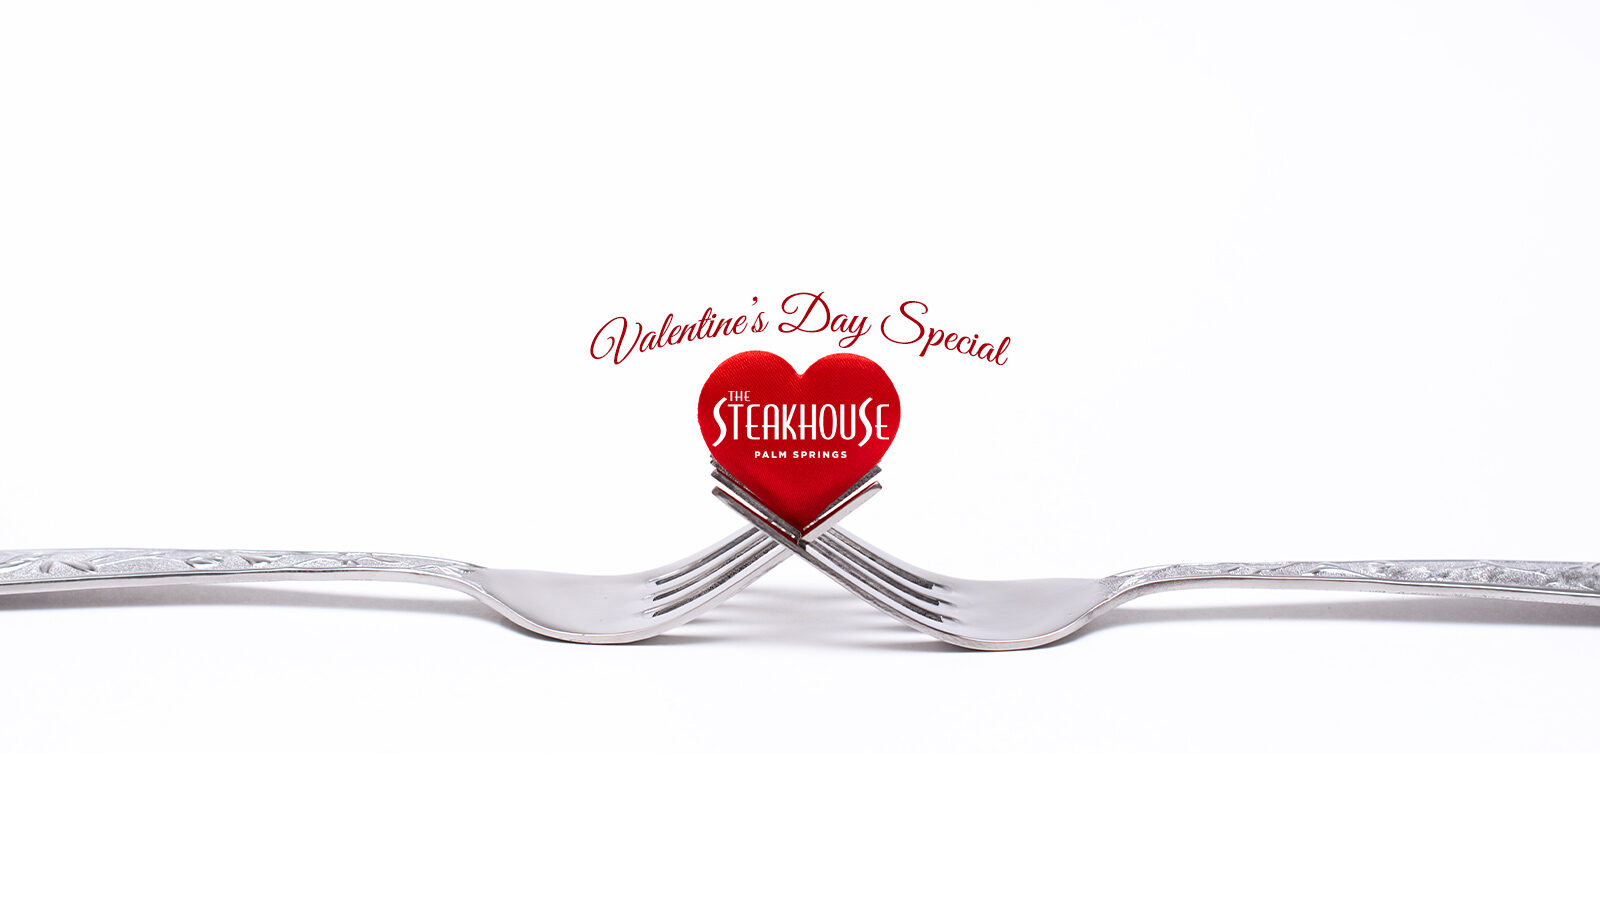 The Steakhouse Palm Springs Valentine’s Day Special